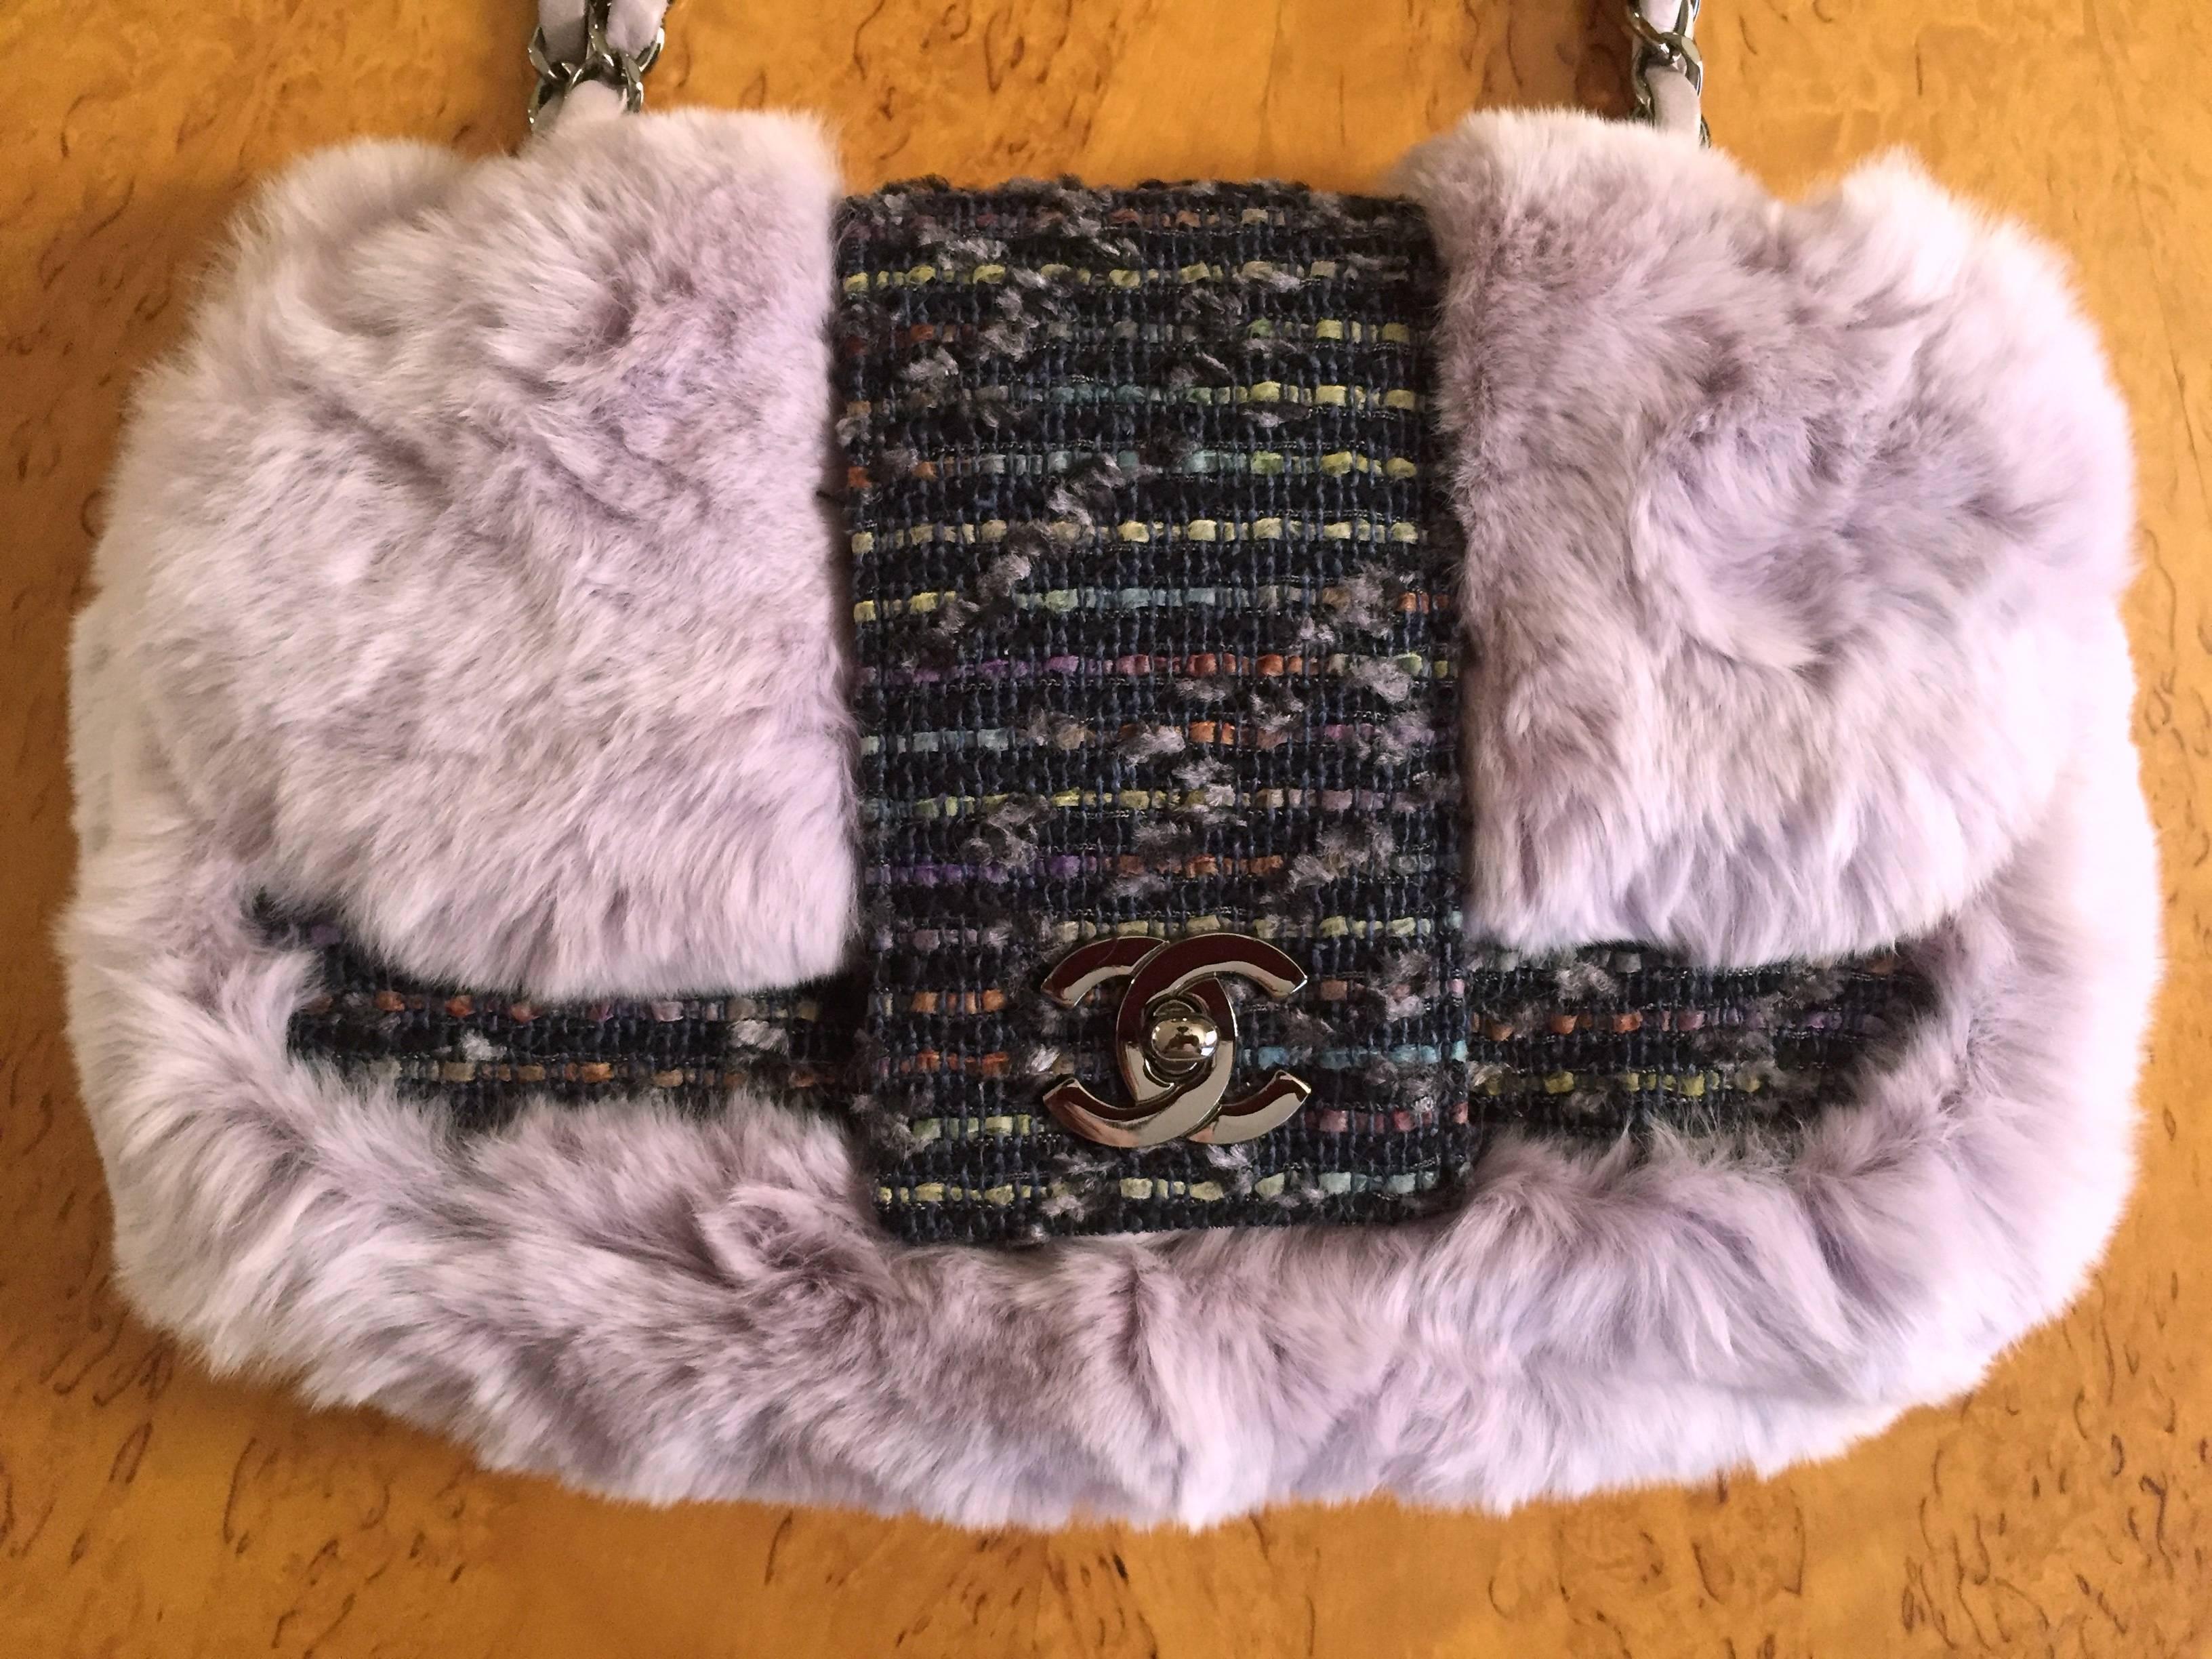 Chanel Exquisite Rare Limited Edition Fur and Tweed Flap Bag with CC Turn Lock .

Chinchilla Rex (Lapine) in a luscious shade of pale lavender gray.
Gunmetal hardware.
One inside compartment with side pocket
10